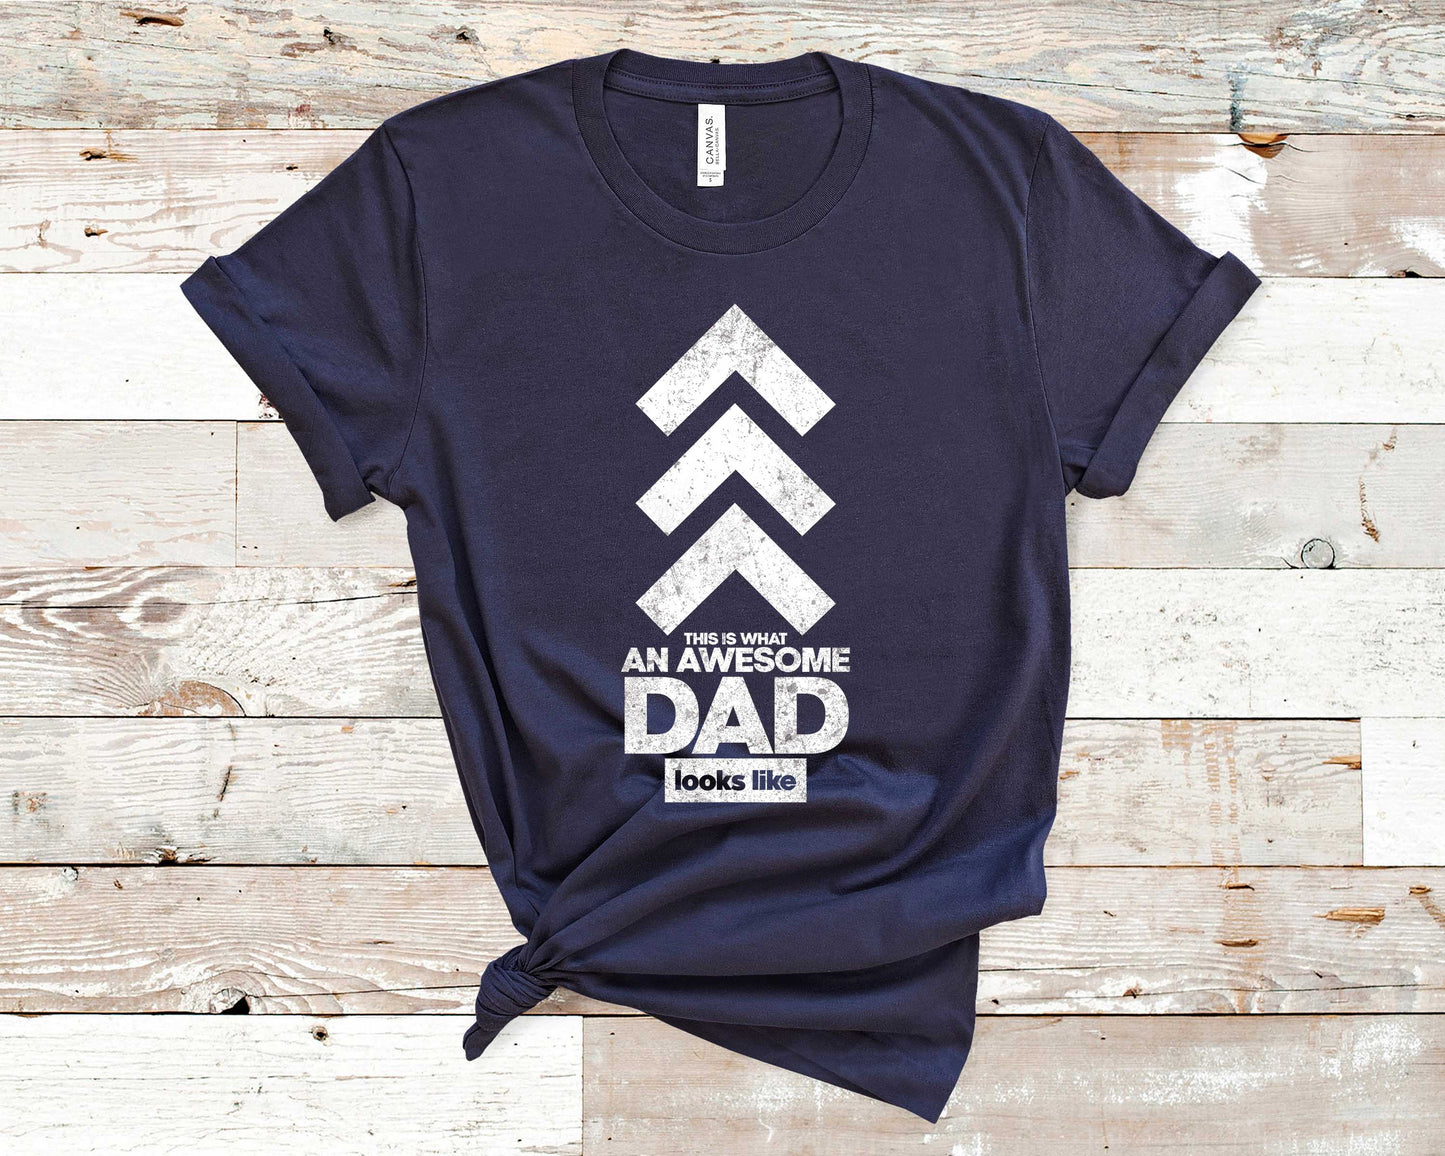 This Is What an Awesome Dad Looks Like - Father's Day